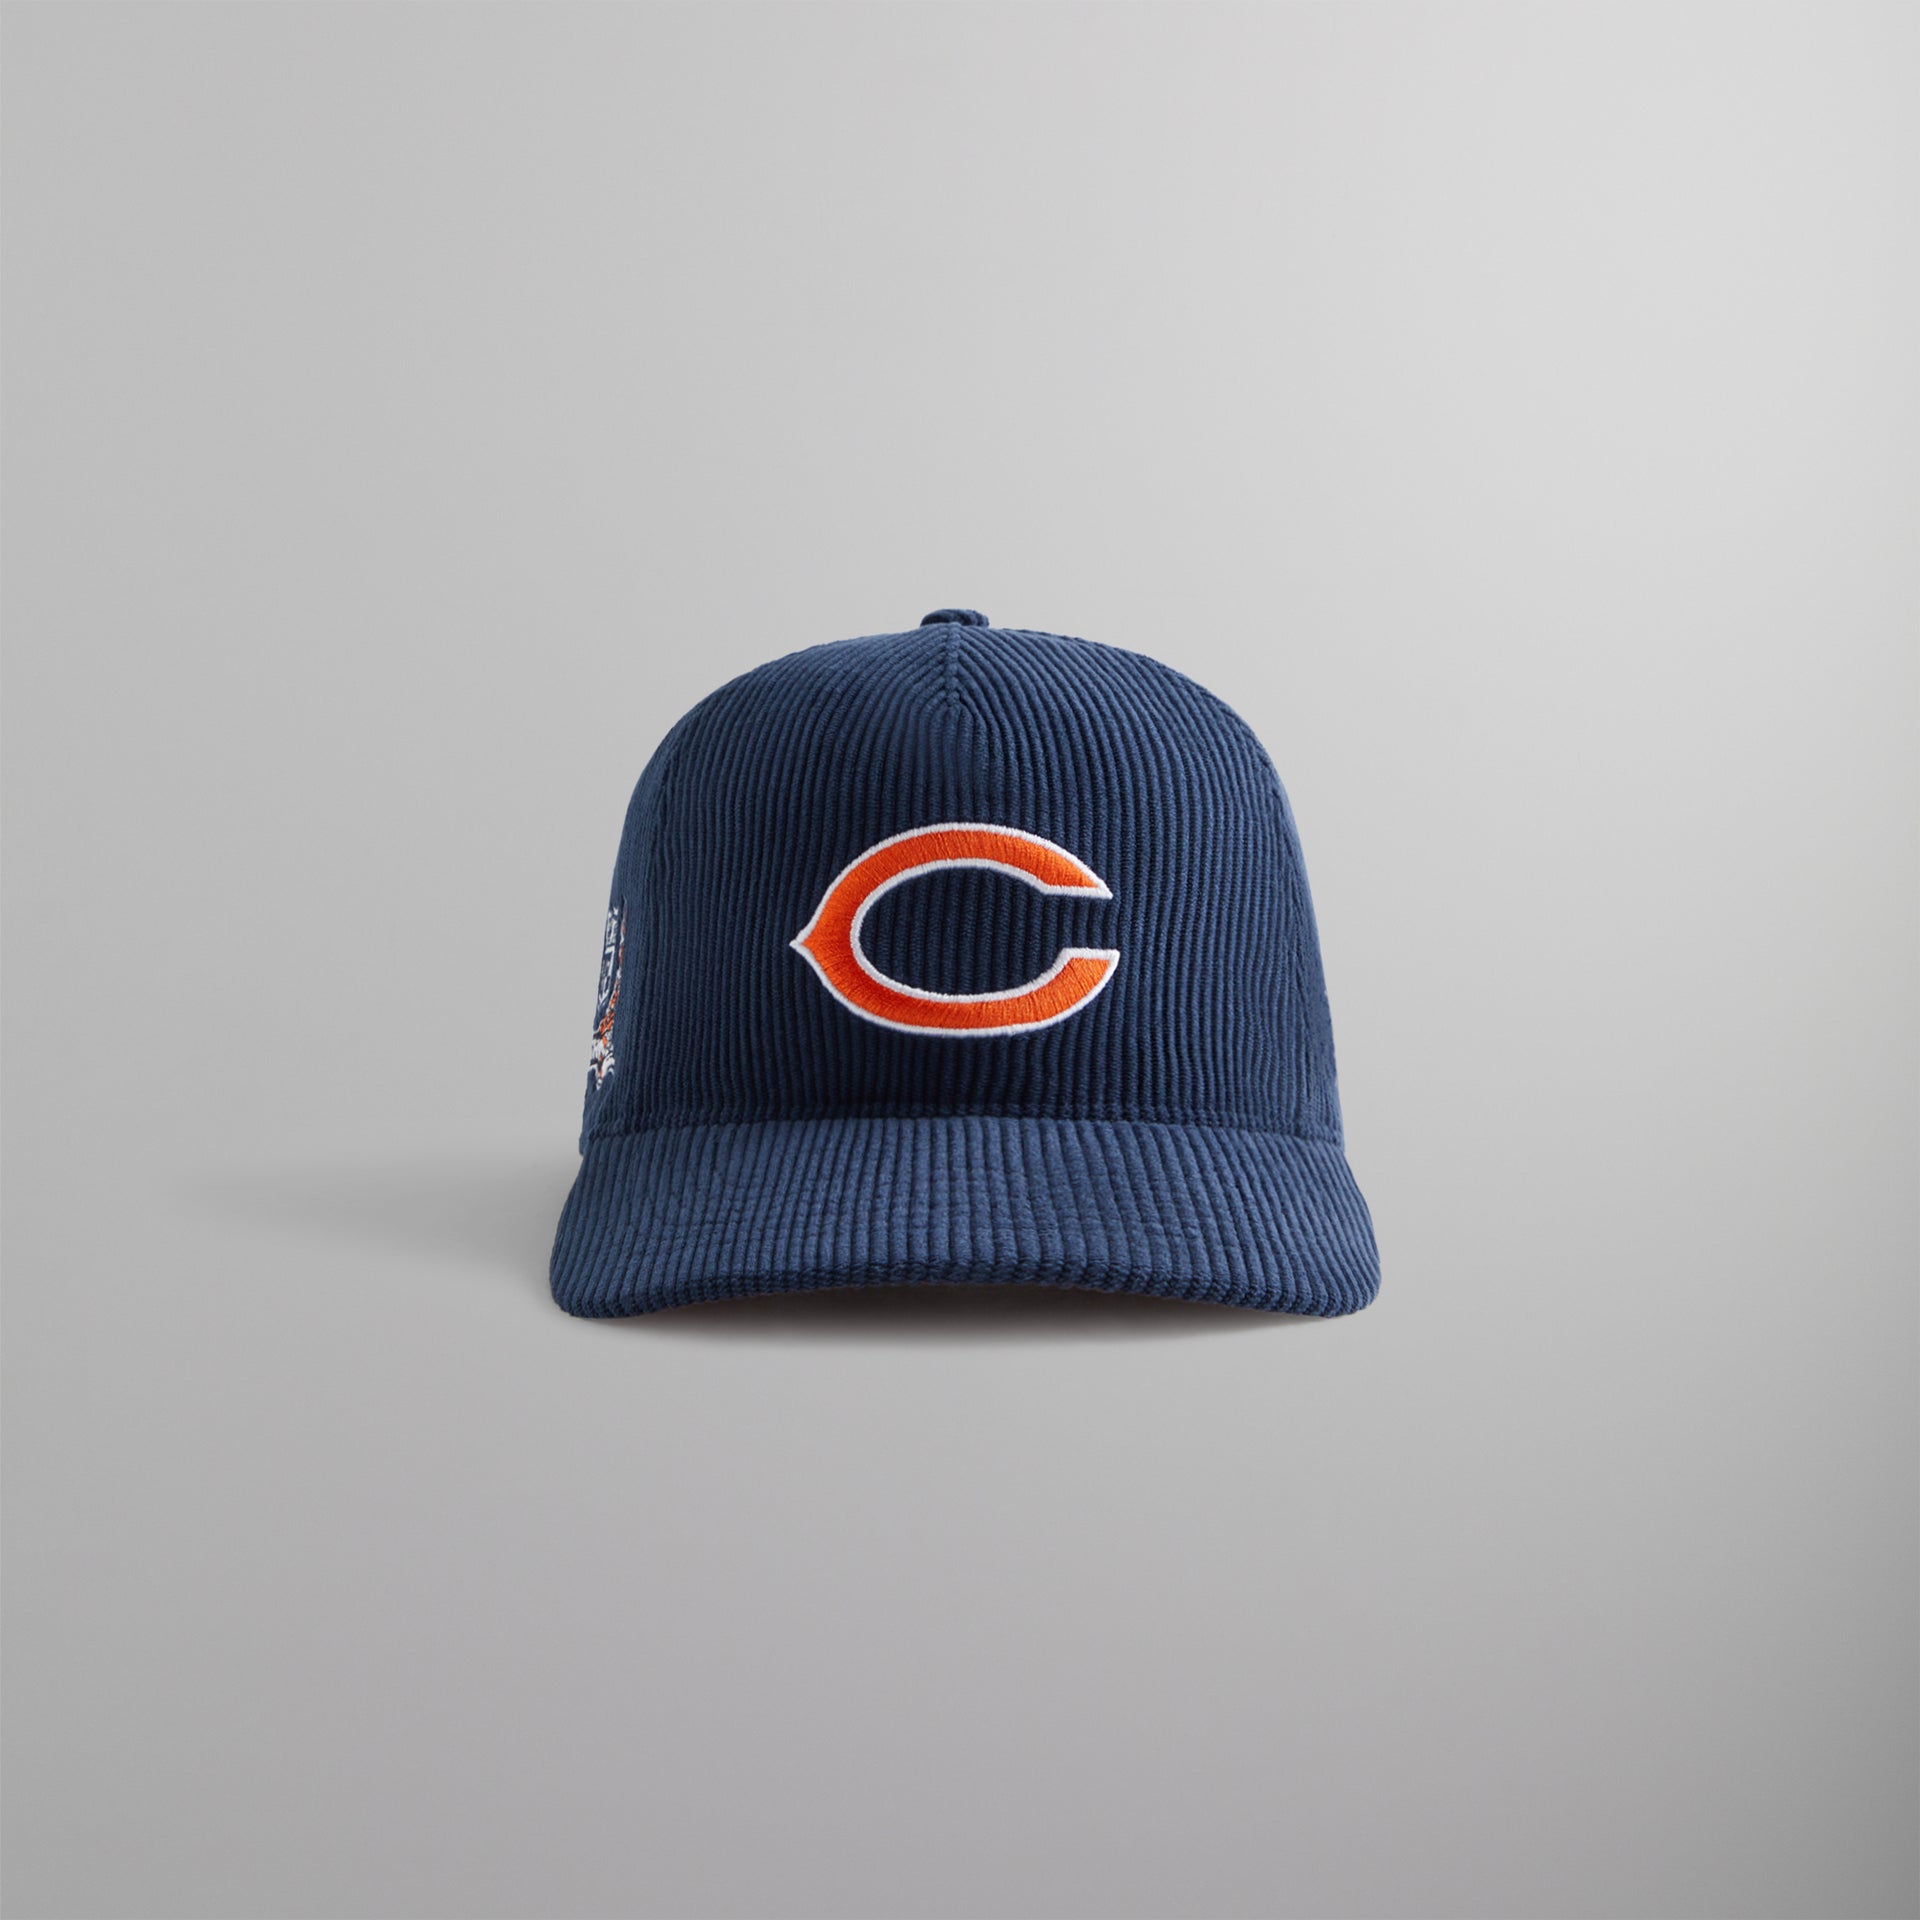 Kith for the NFL: Bears '47 Hitch Snapback - Meter